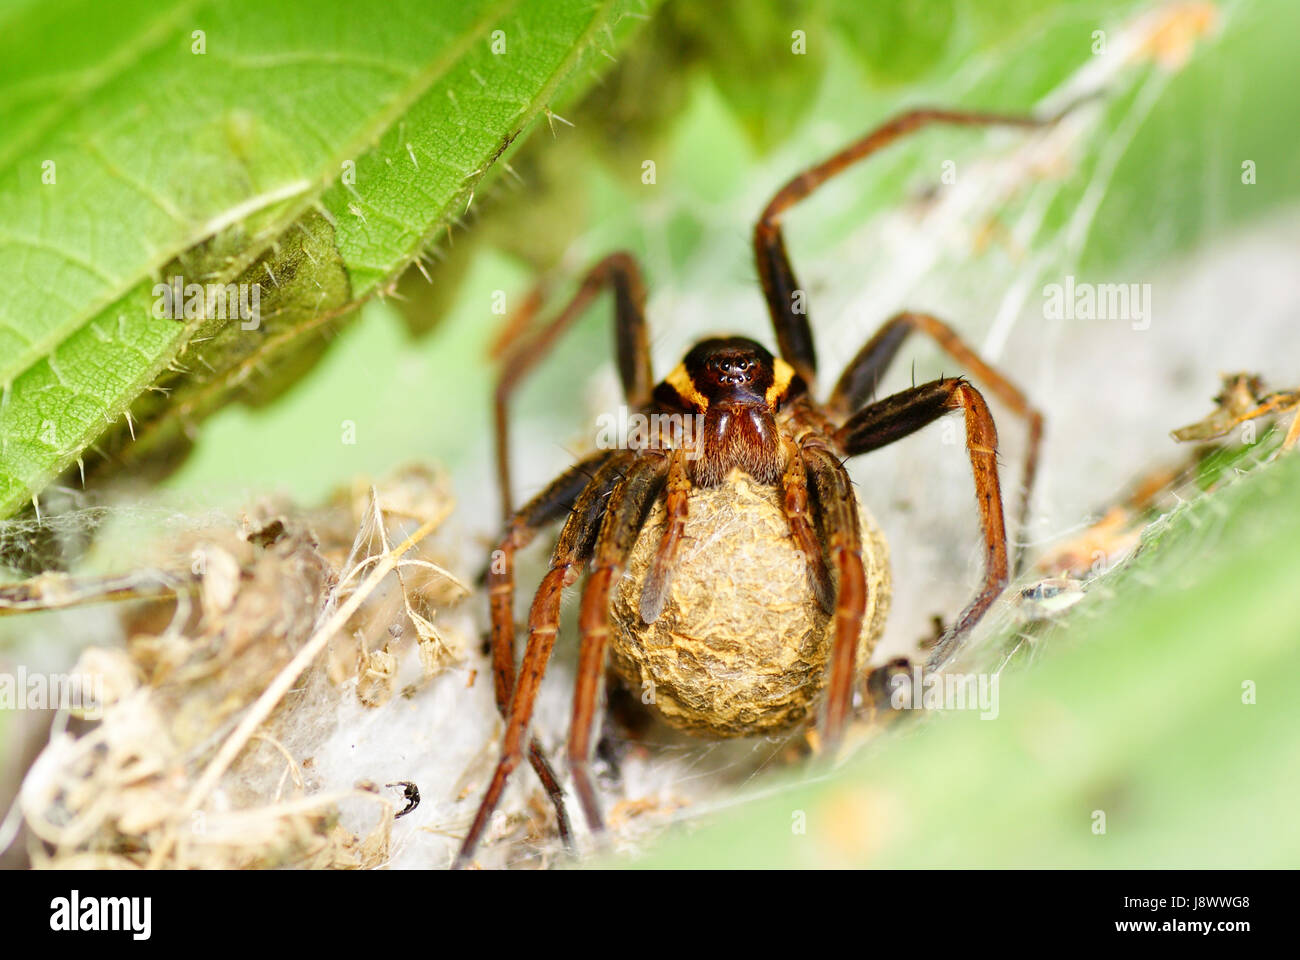 leaf, animal, insect, spider, reproduction, replication, lawn, green, nature, Stock Photo